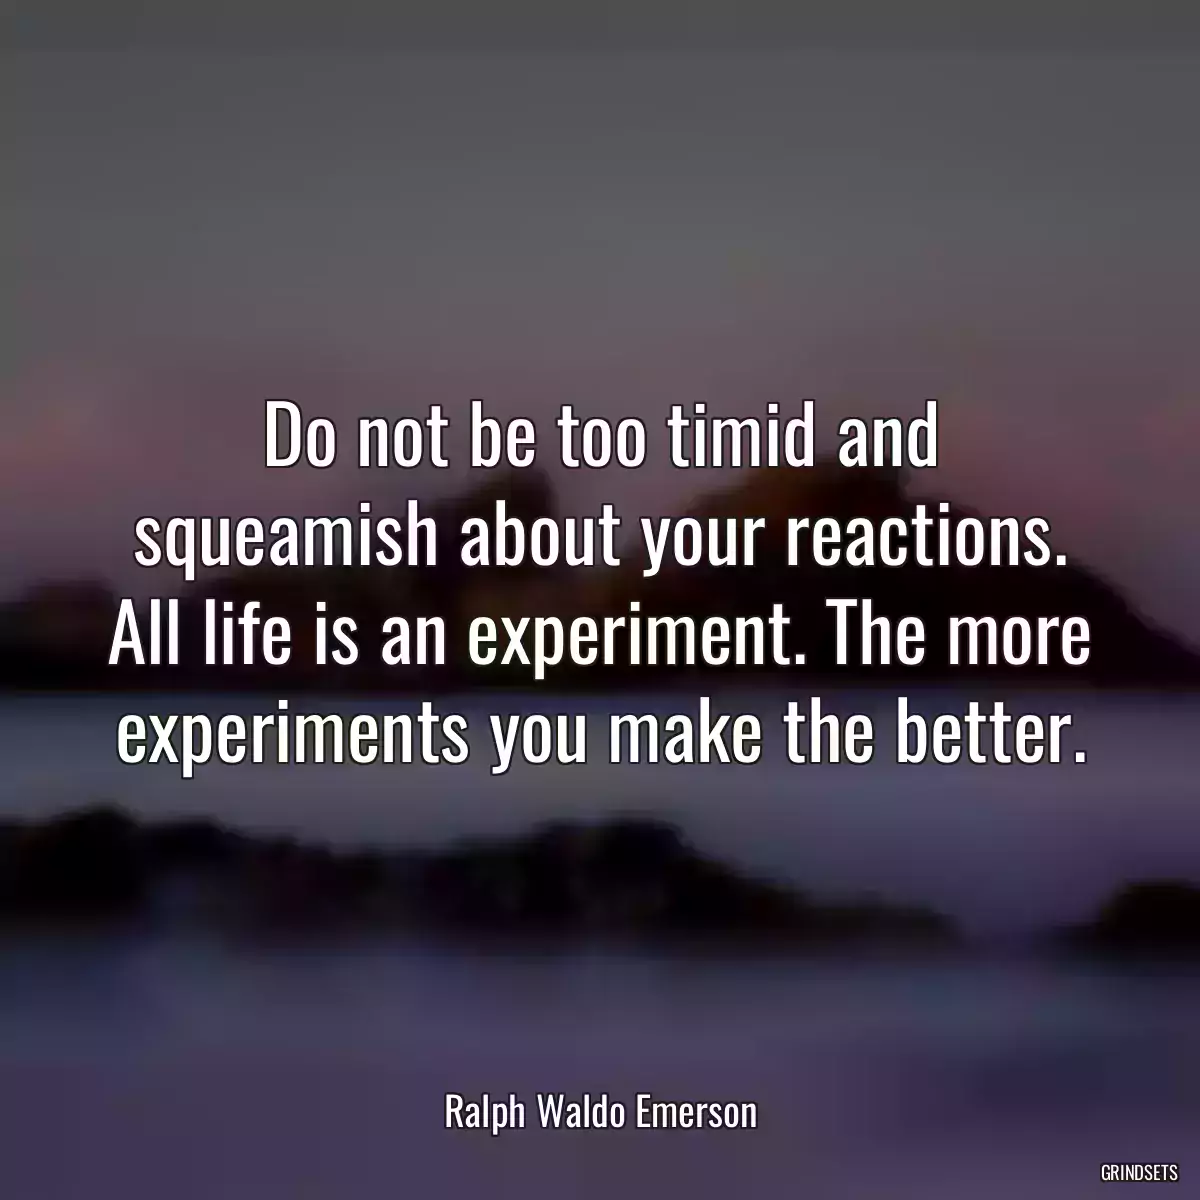 Do not be too timid and squeamish about your reactions. All life is an experiment. The more experiments you make the better.